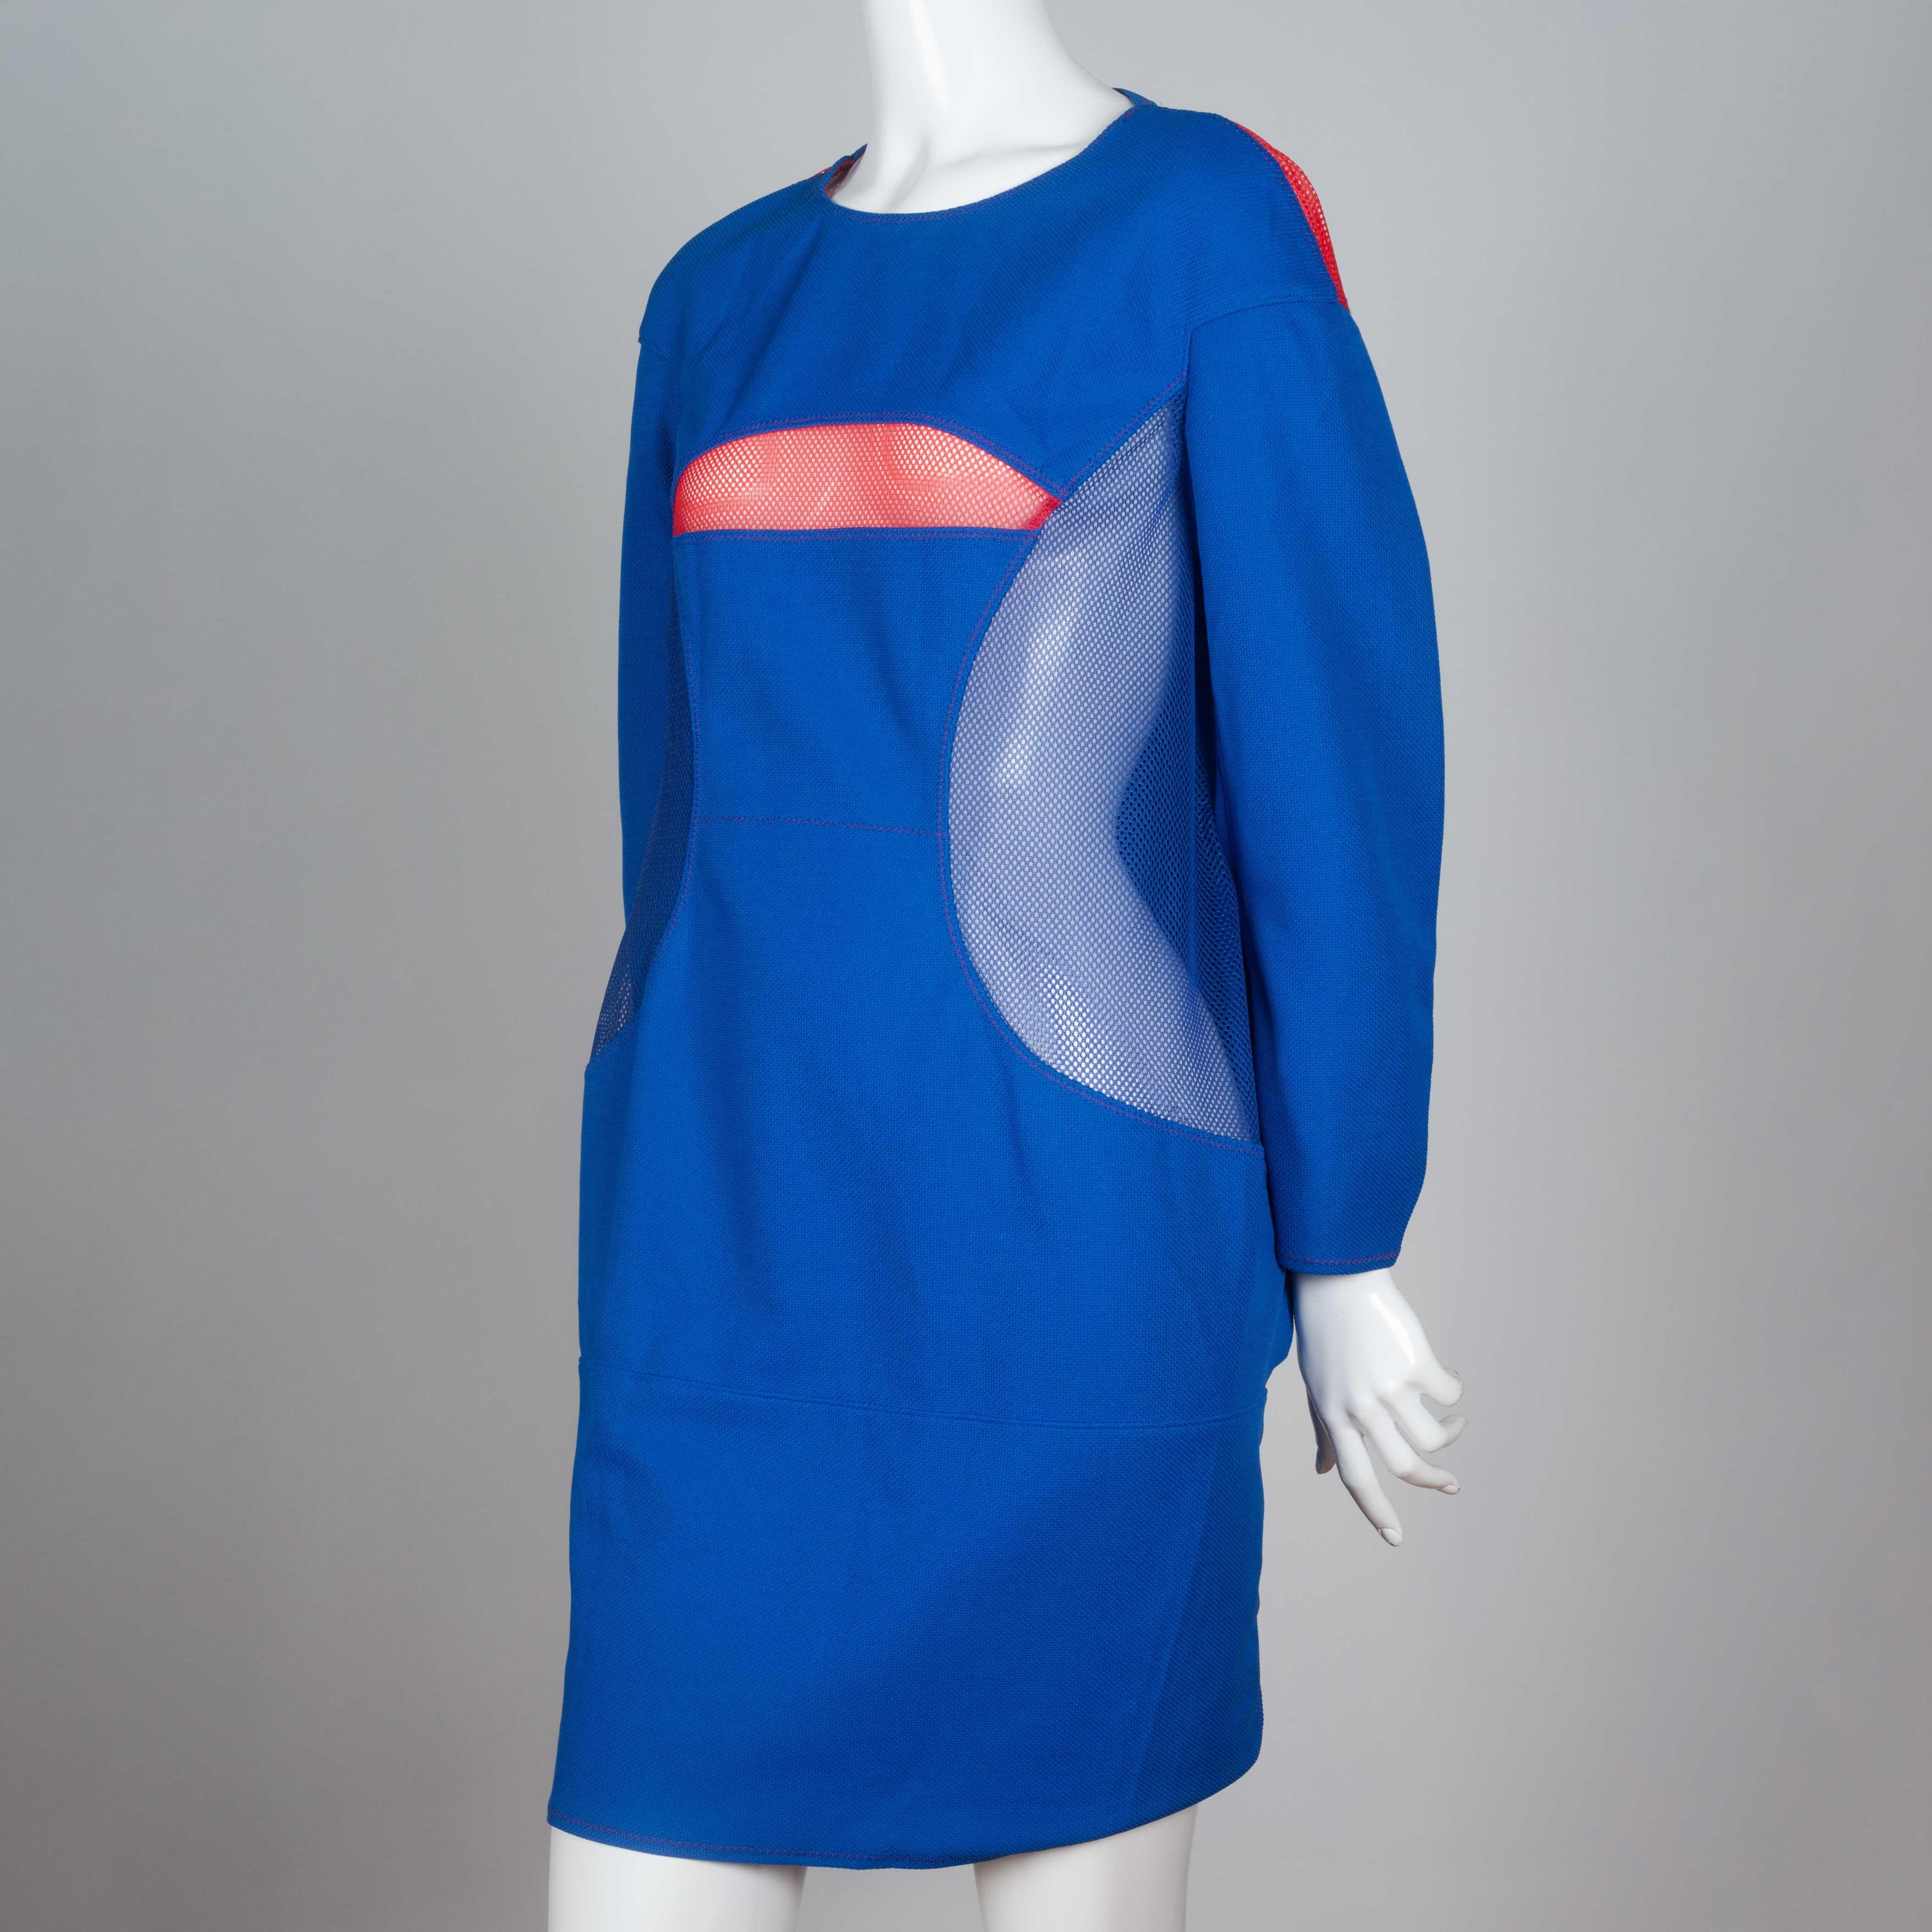 Junya Watanabe Comme des Garçons 2012 blue three quarter sleeve, knee length dress from Japan. Blue and pink mesh covered cut-outs and pink stitching completes the design. A sporty techno feel.
 
YEAR: 2012
MARKED SIZE: M
US WOMEN'S: M/L
US MEN'S: